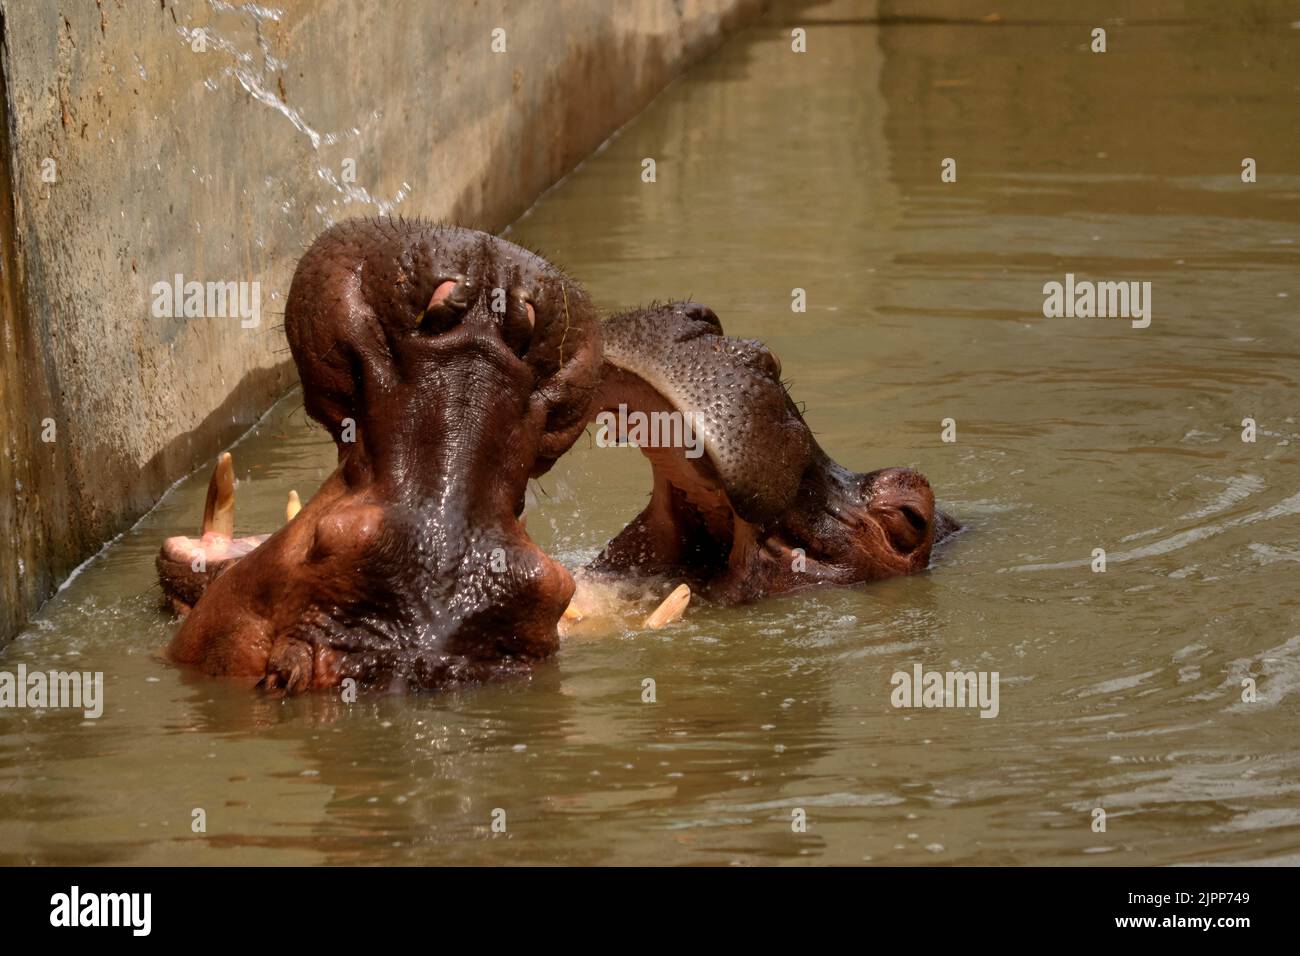 Two giant hippopotamus in the dirty water fighting with each other Stock Photo